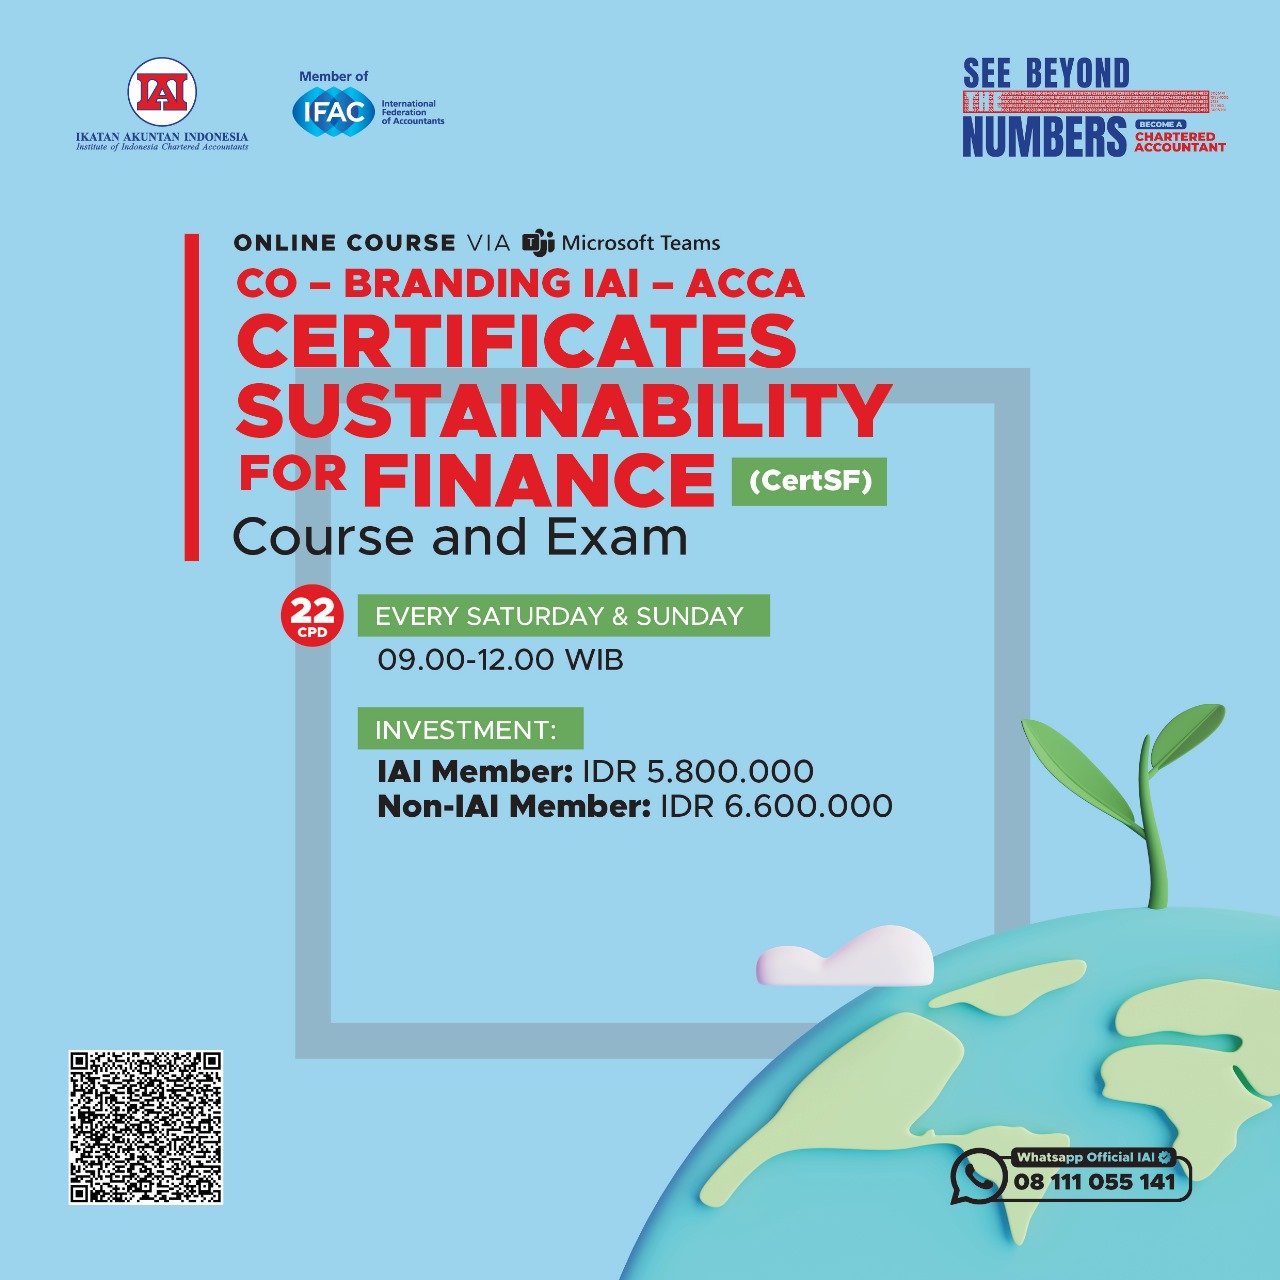 Certificate Sustainable of Finance